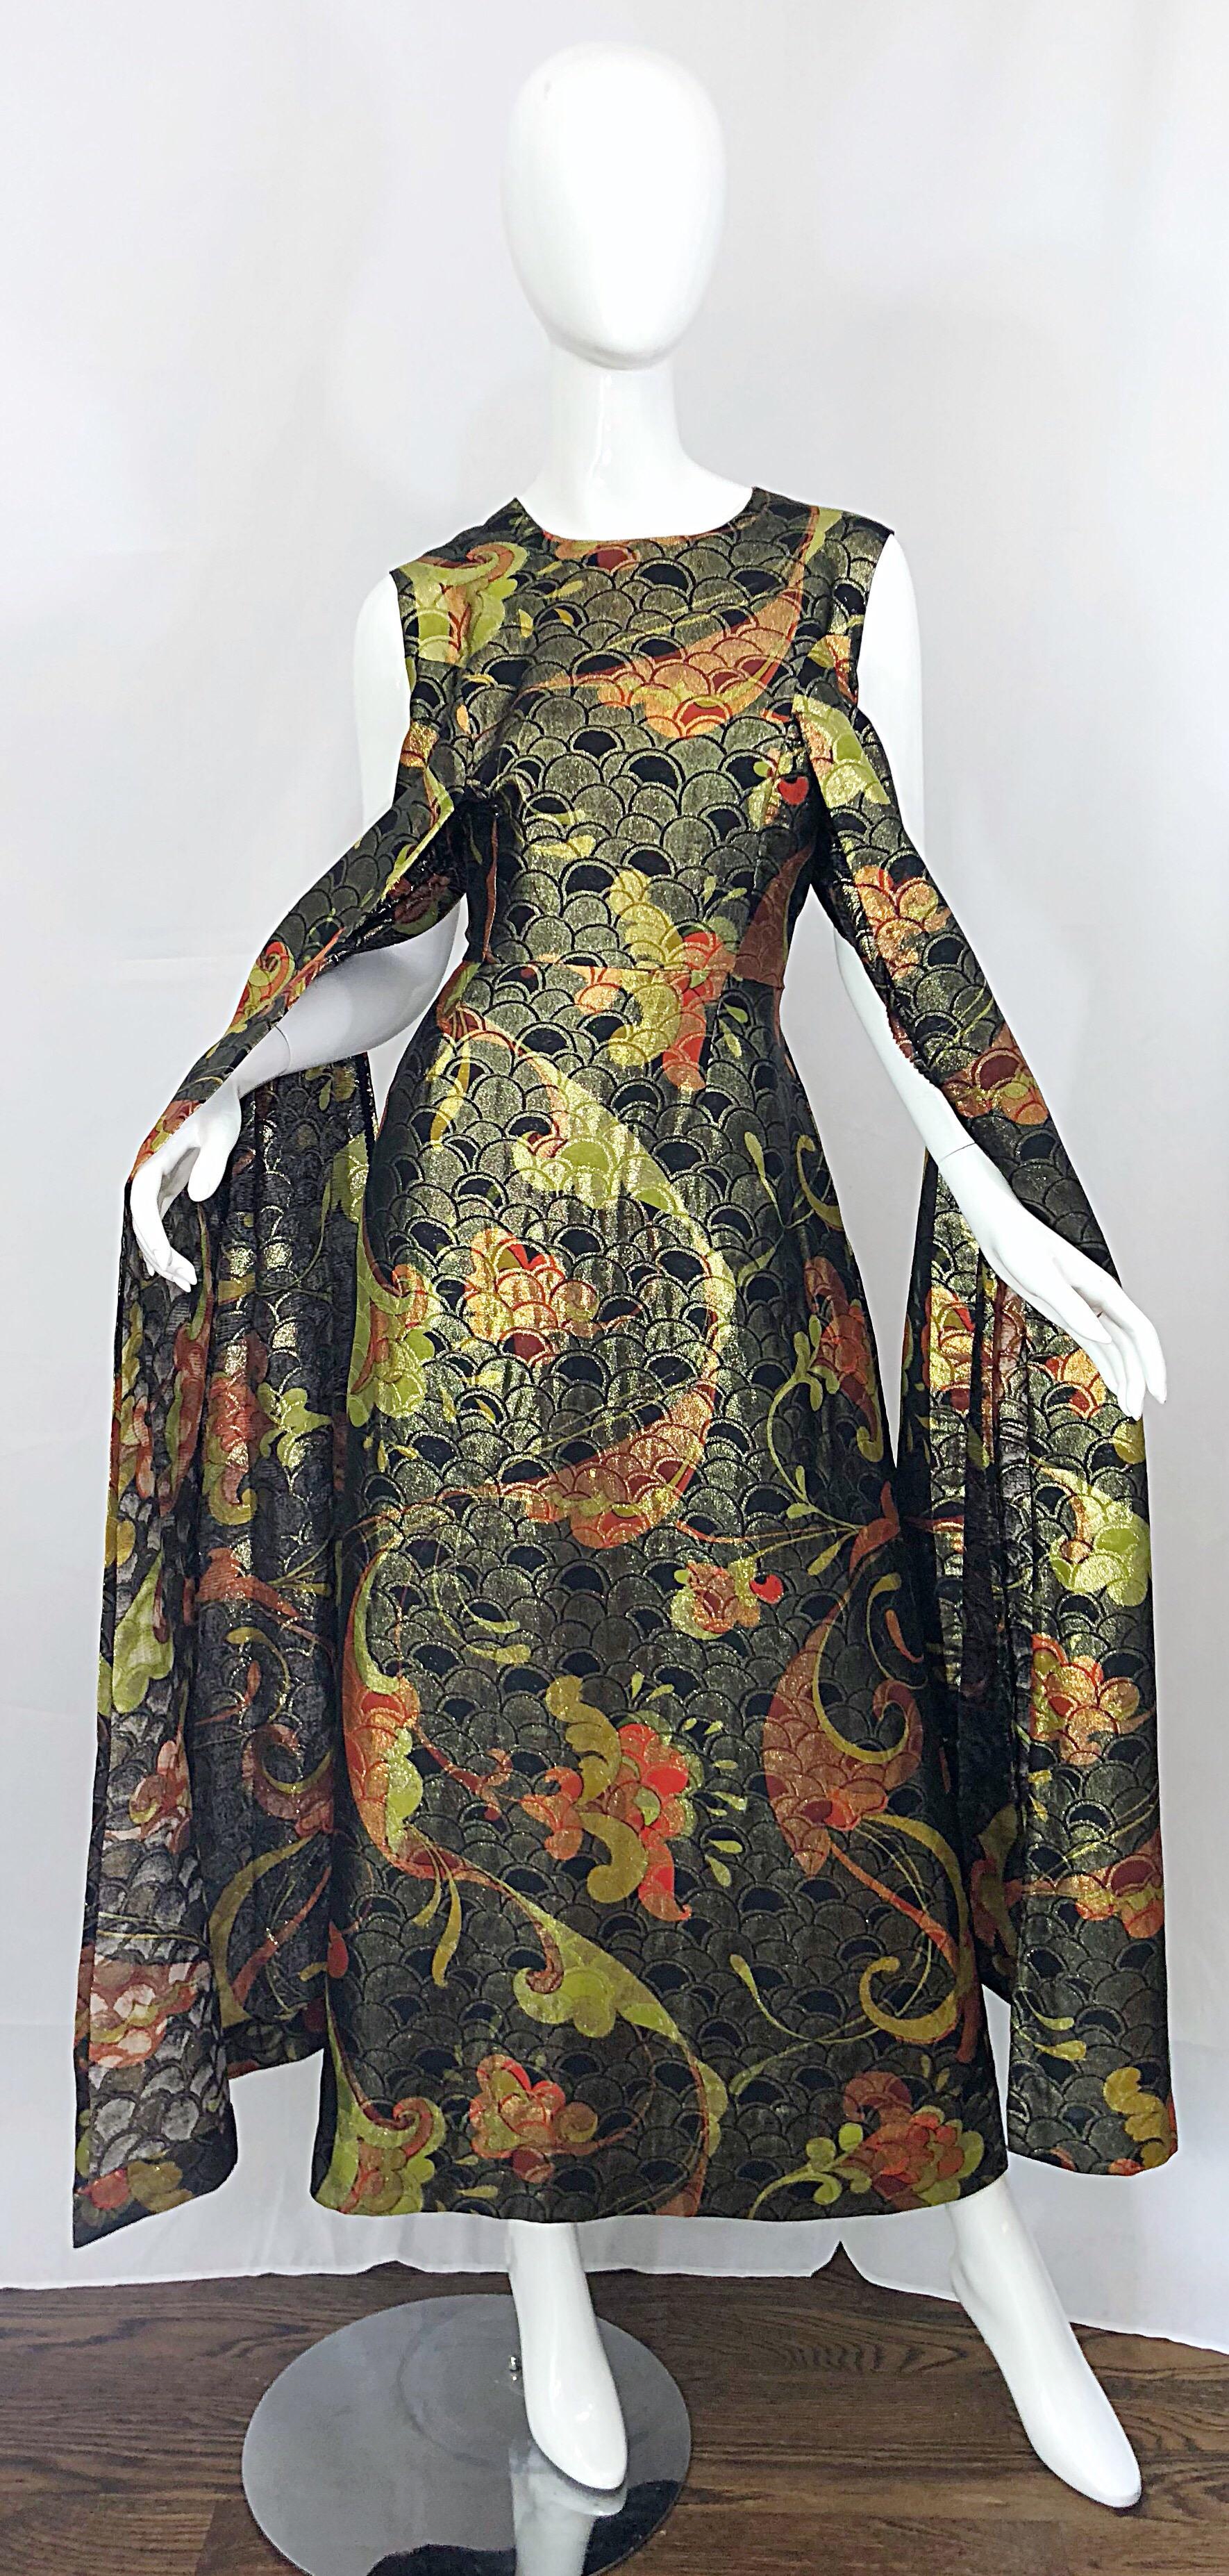 Incredible 1960s couture grade Asian print silk metallic maxi dress! Features Asian themed prints in warm tones of chartreuse green, olive green, rust, red, and black throughout. Fabulous 'wings' in the fron can be worn around the arms for a more